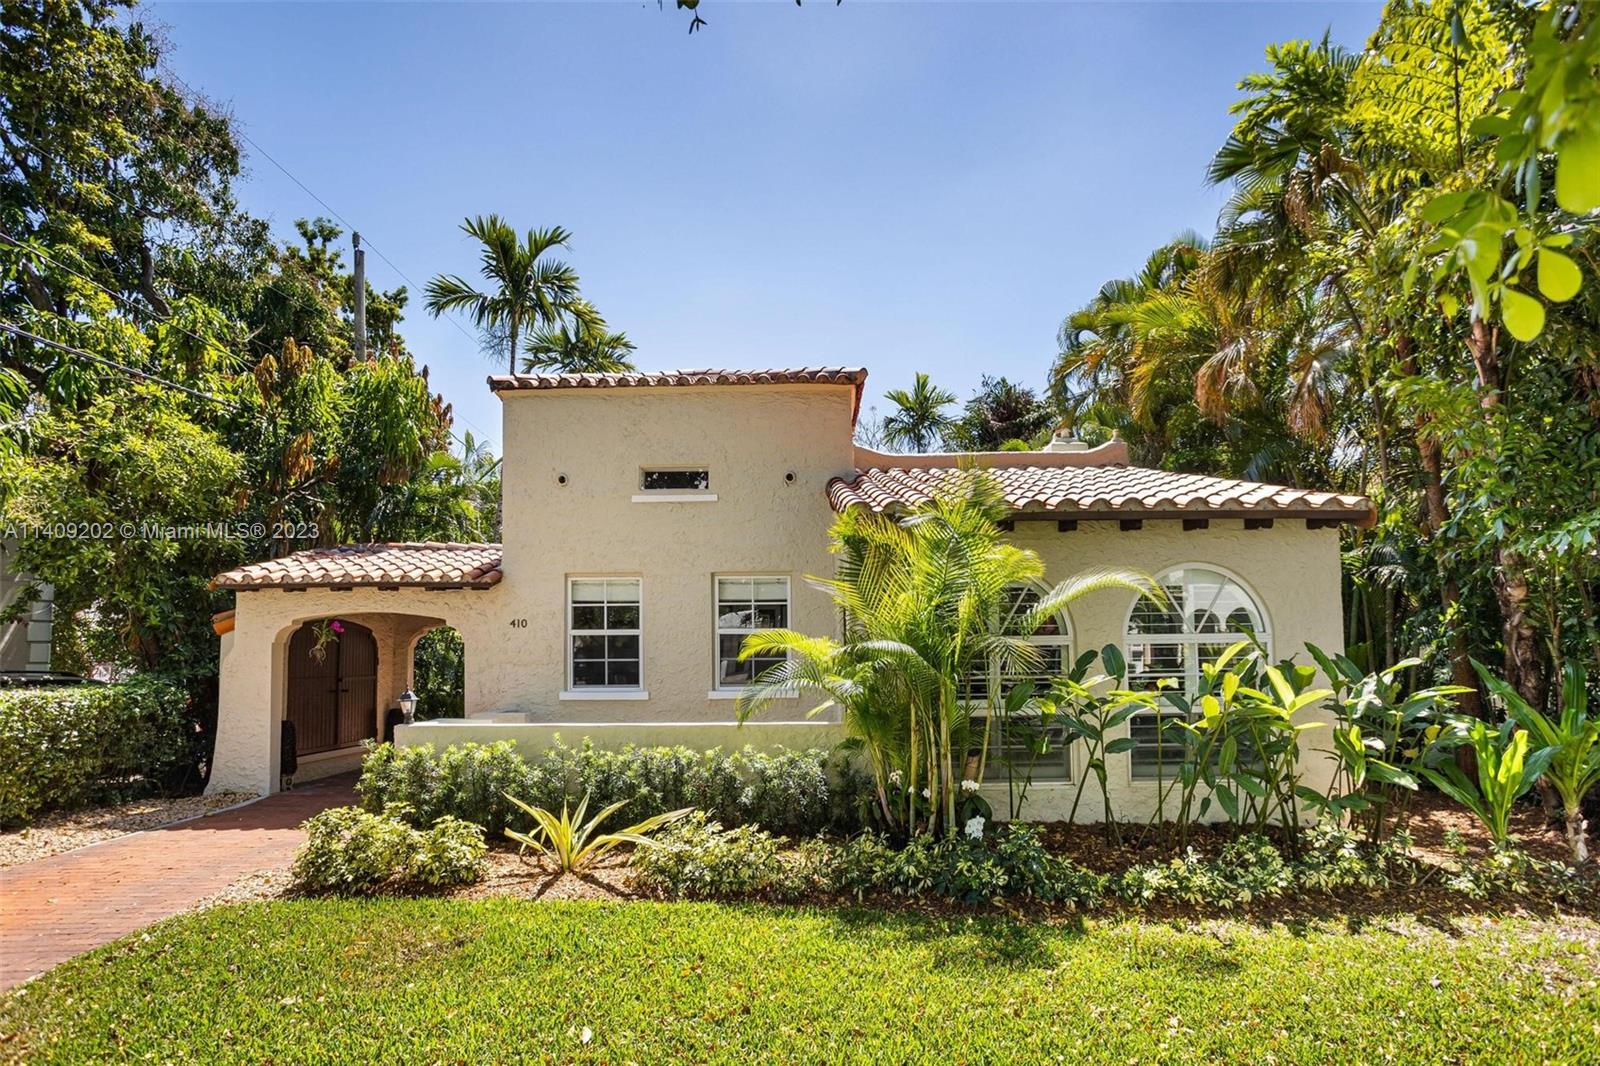 Coral Gables Old Spanish home nestled in its own private tropical oasis, on the market for the first time in decades. Main house features soaring, vaulted wood beamed ceilings w/ a floor plan ideal to entertain & enjoy the natural light & beauty the impact resistant windows permeate. The property consists of two structures; the main home, which has 2 bedrooms & 2 bathrooms & a tucked away bungalow cottage, which is essentially a separate home, w/ a full-sized bathroom, living area, kitchenette, washer/dryer & private covered terrace. The convenience of the location can not be overstated, just steps from the Youth Center, the recently renovated Coral Gables Library & short walking distance to all the restaurants & shops that Gables has to offer, in addition to the new Plaza Development.